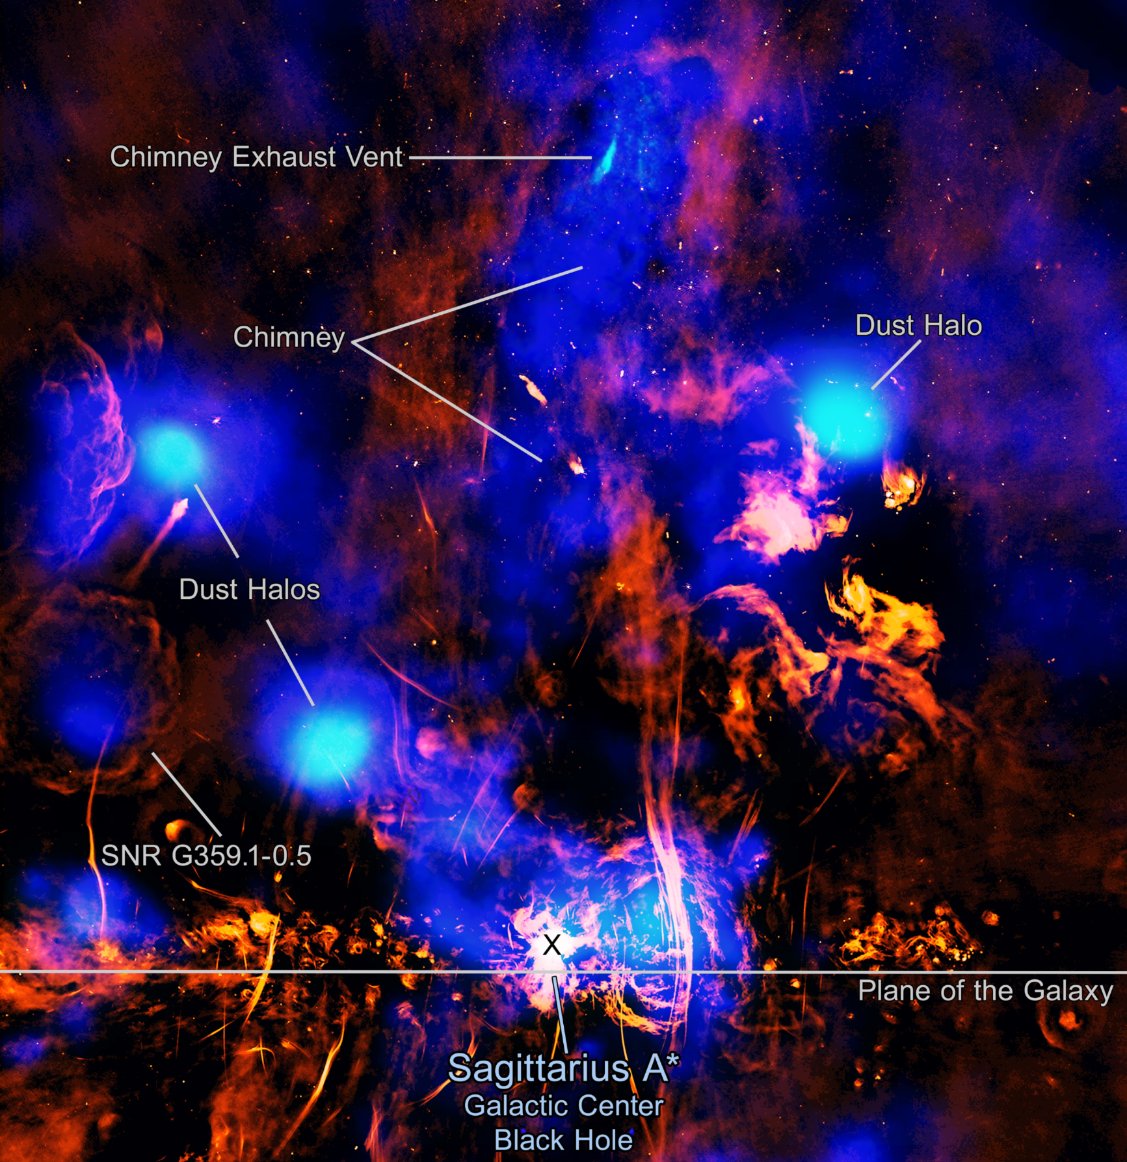 NASA's @chandraxray has captured evidence of an exhaust vent attached to a chimney releasing hot gas from a region around the supermassive #BlackHole at the center of the Milky Way. Learn what researchers think is causing this >> go.nasa.gov/4bO6w5t #BlackHoleWeek